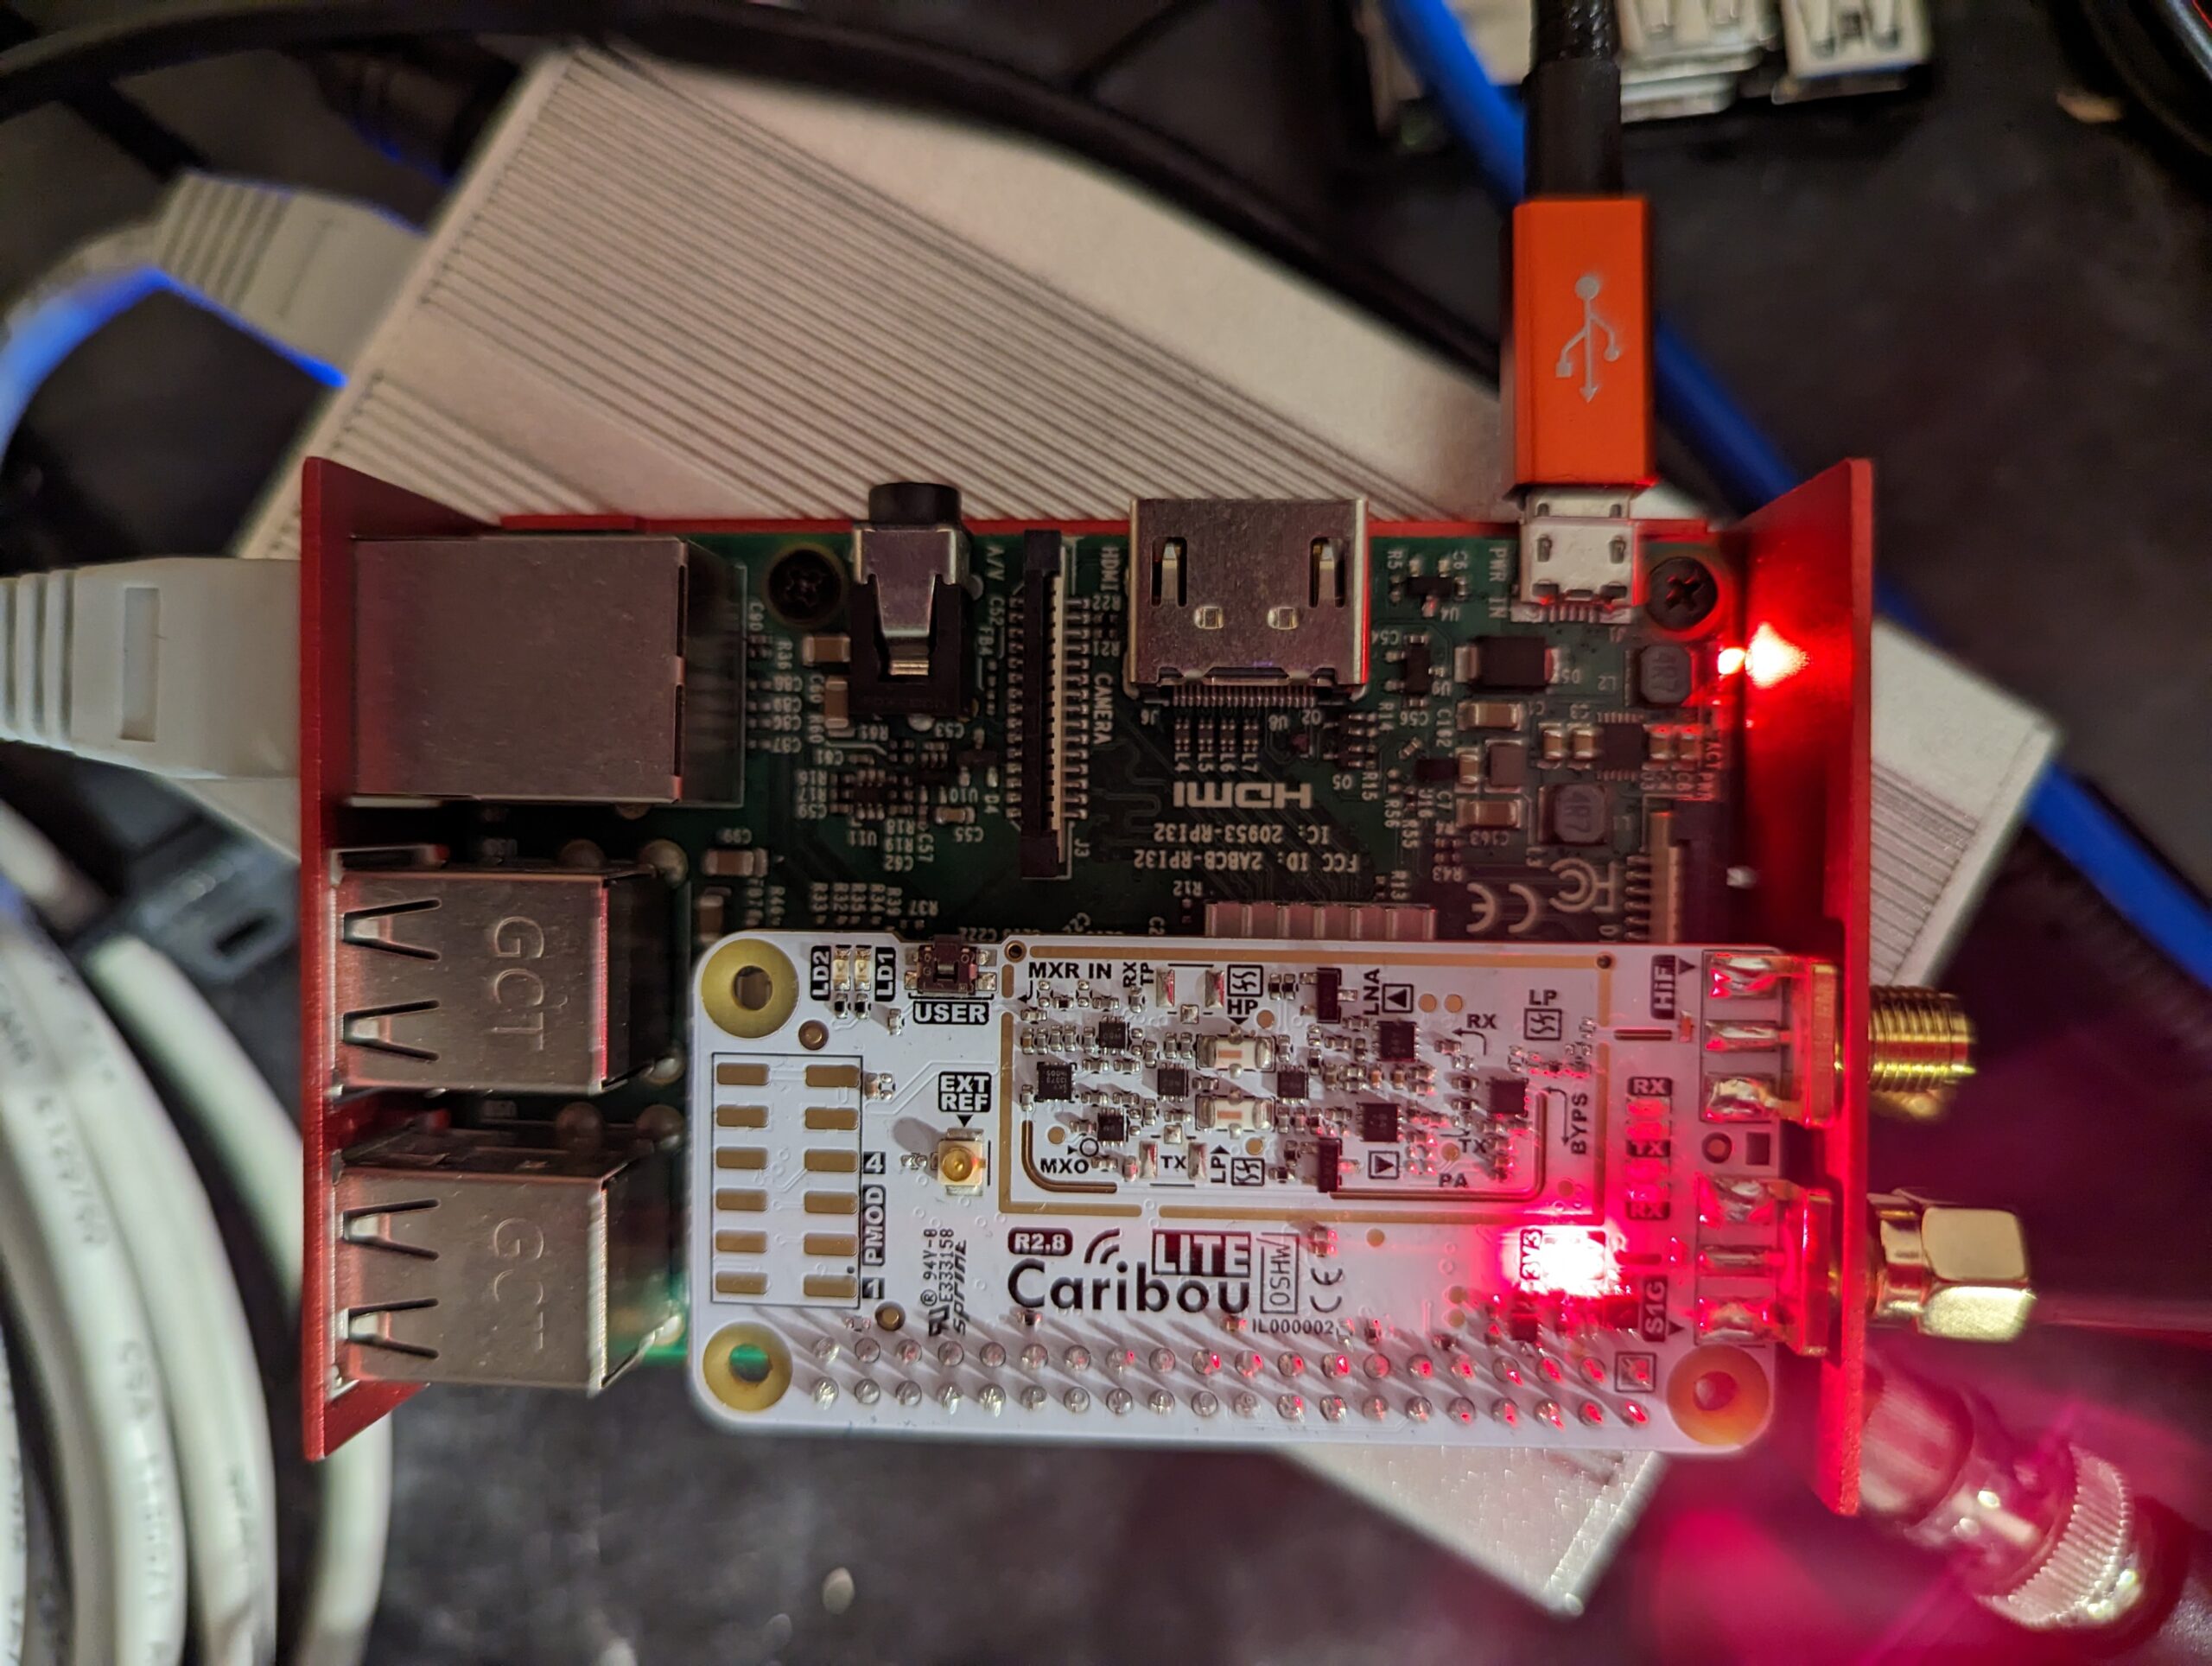 Getting CaribouLite working in DragonOS on a Raspberry Pi